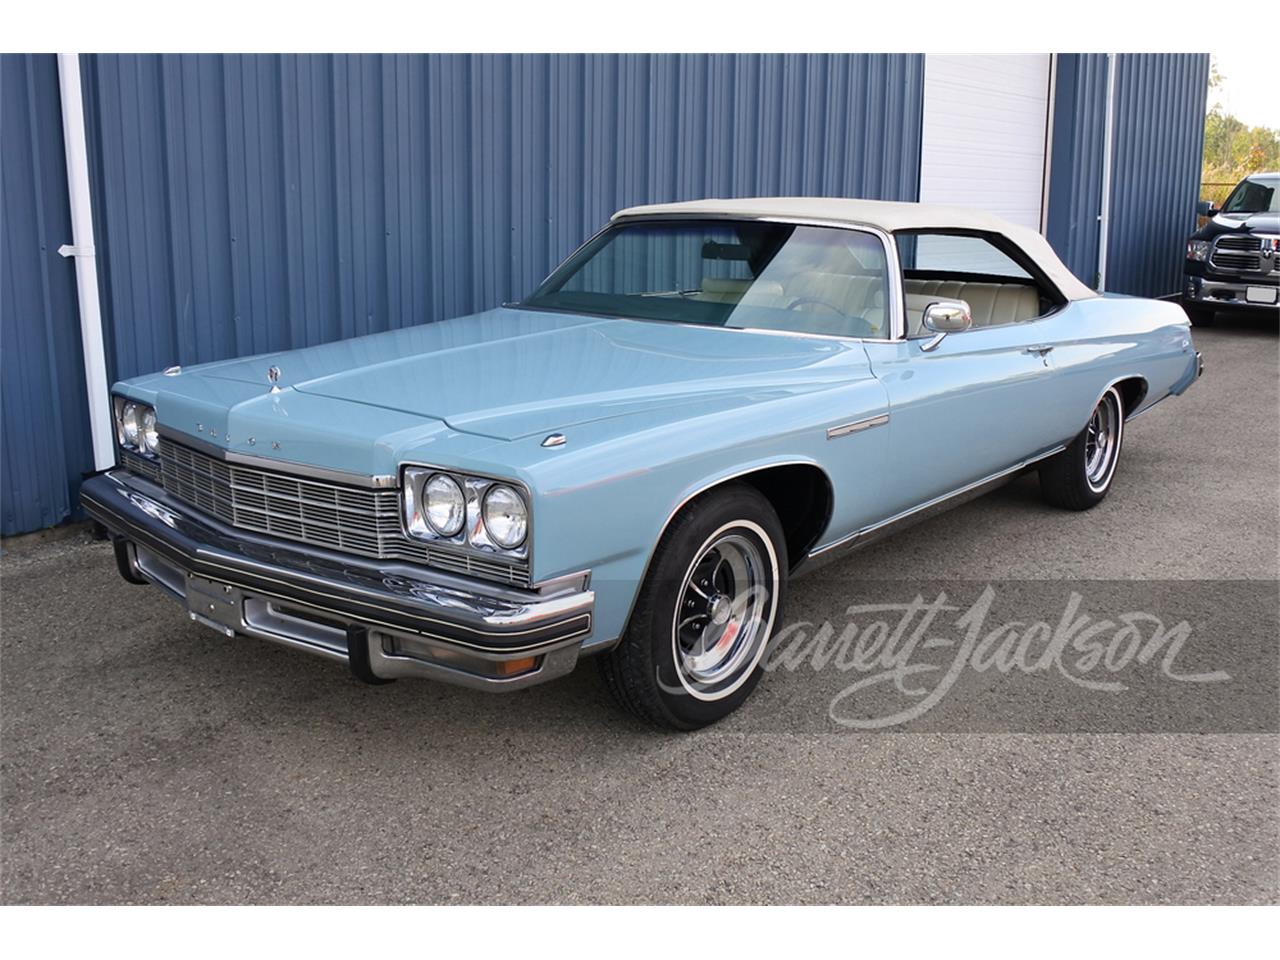 For Sale at Auction: 1975 Buick LeSabre in Scottsdale, Arizona for sale in Scottsdale, AZ